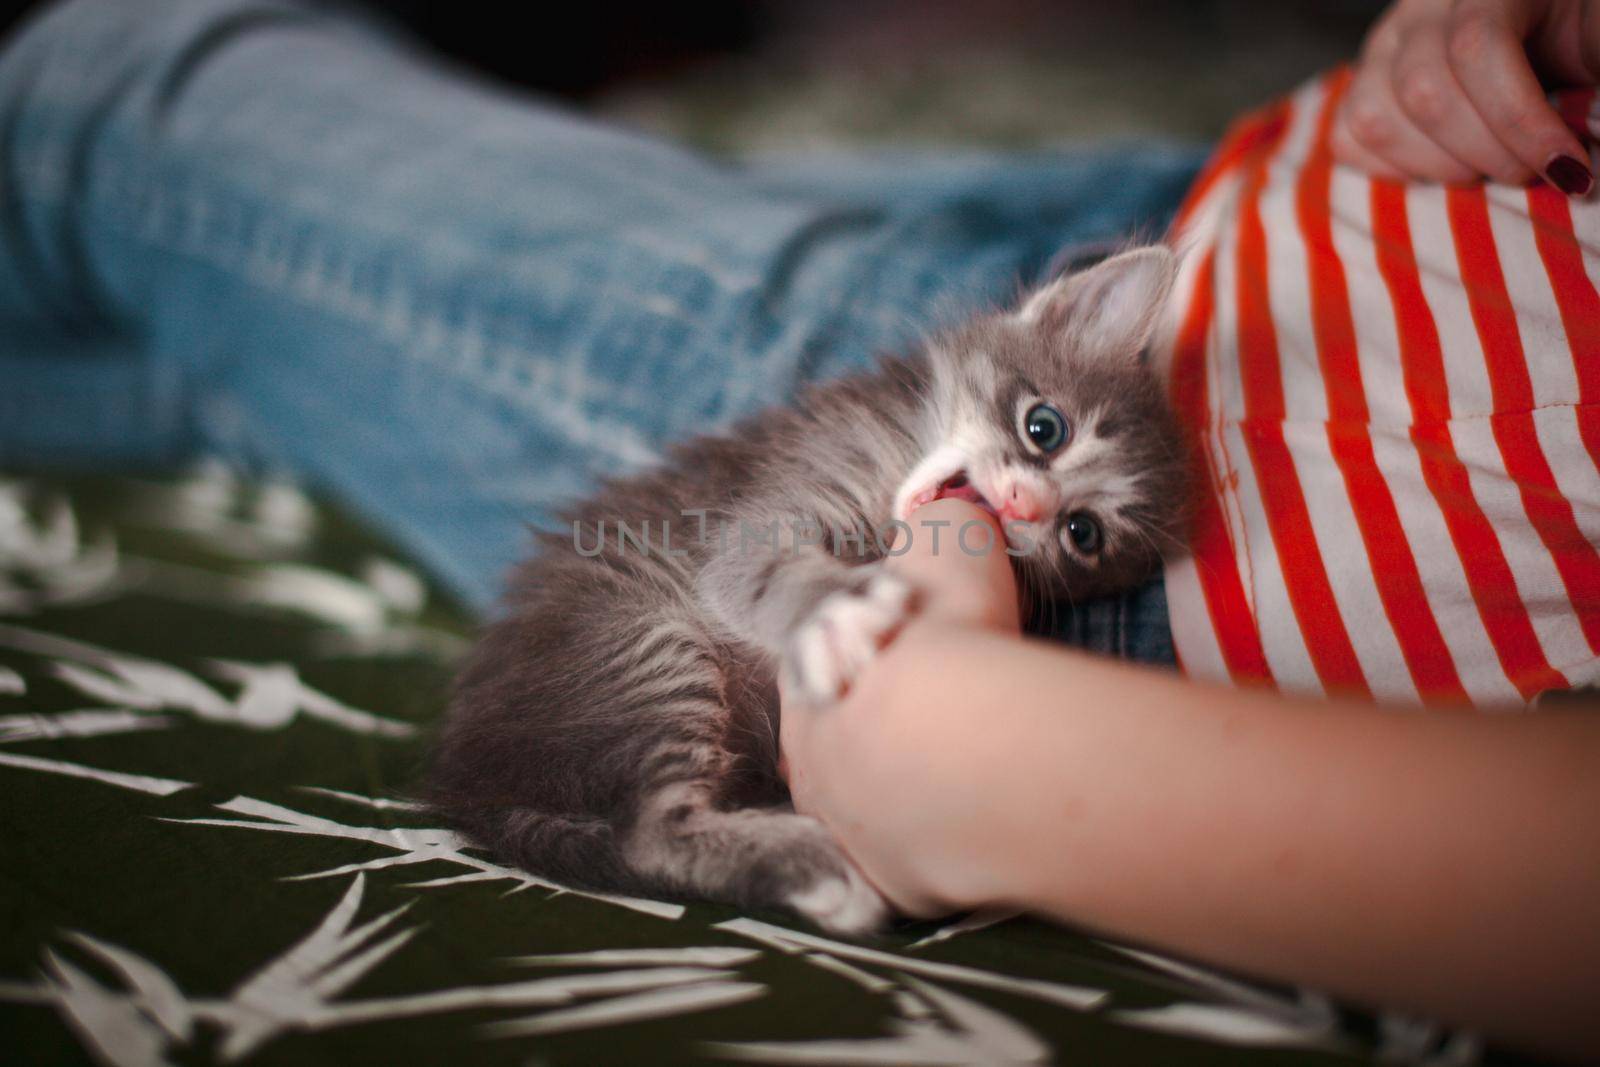 A grey kitten trying to bite a girl's hand